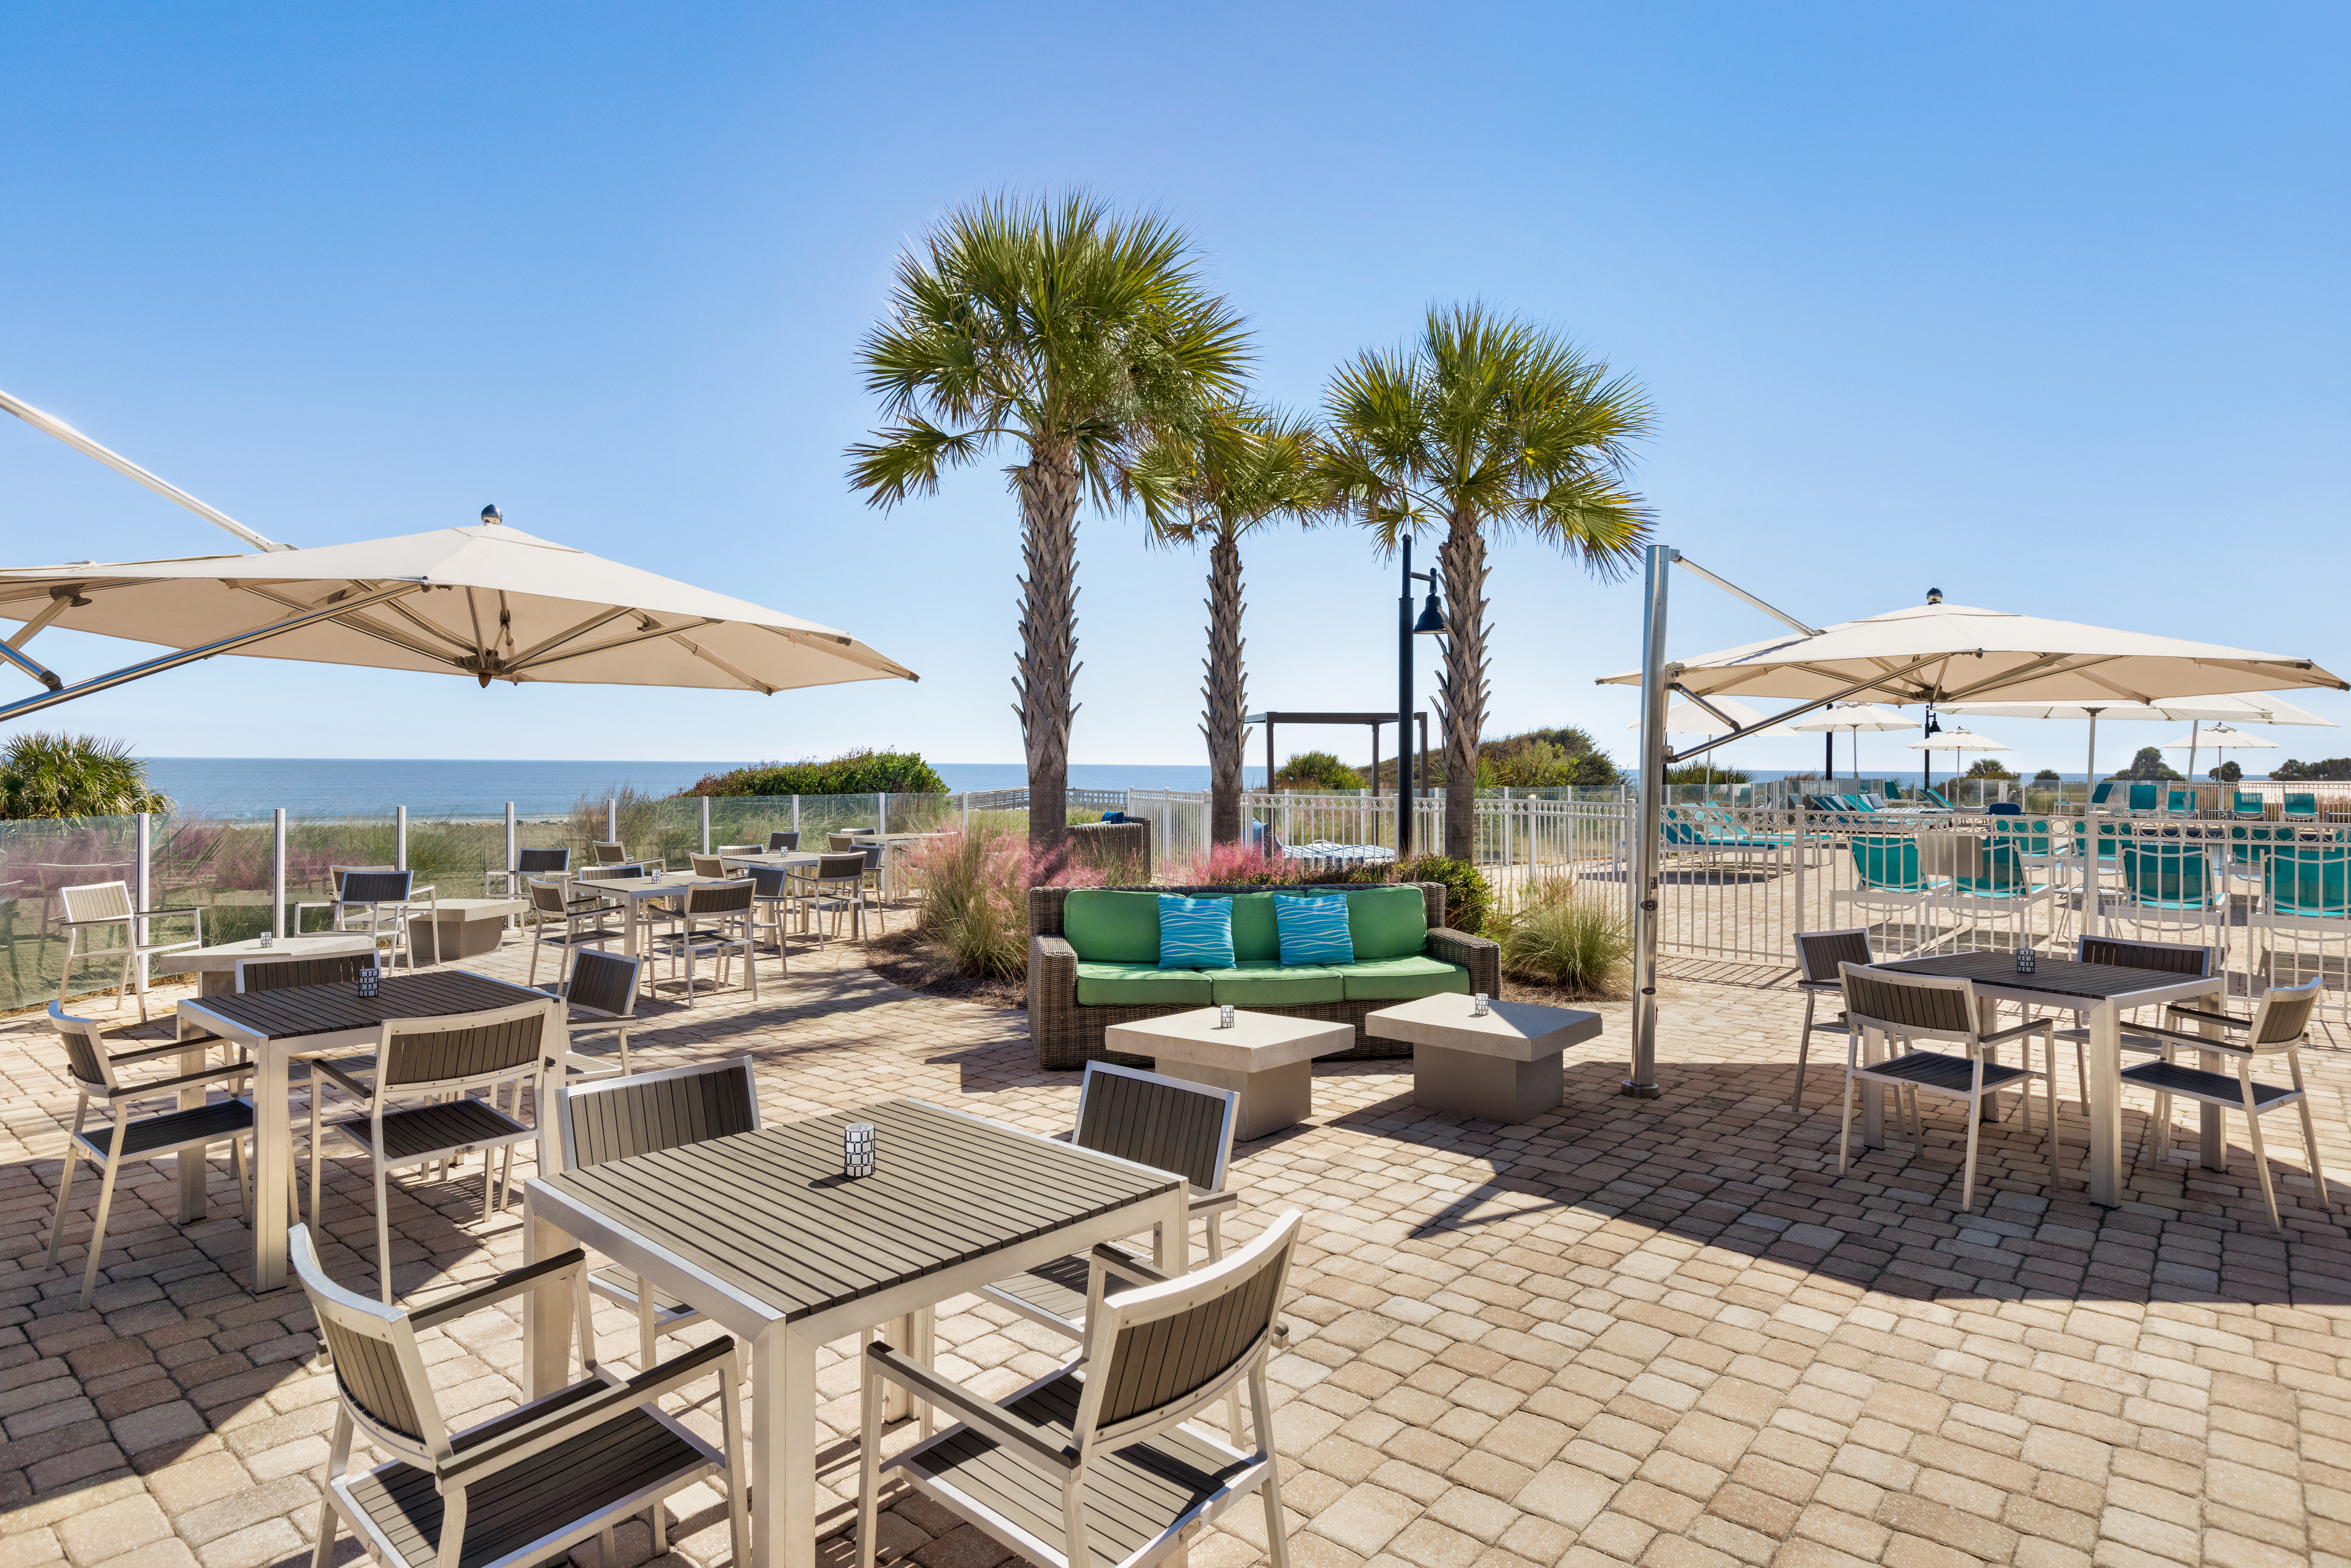 Enjoy poolside dining with ocean views at The Anchor